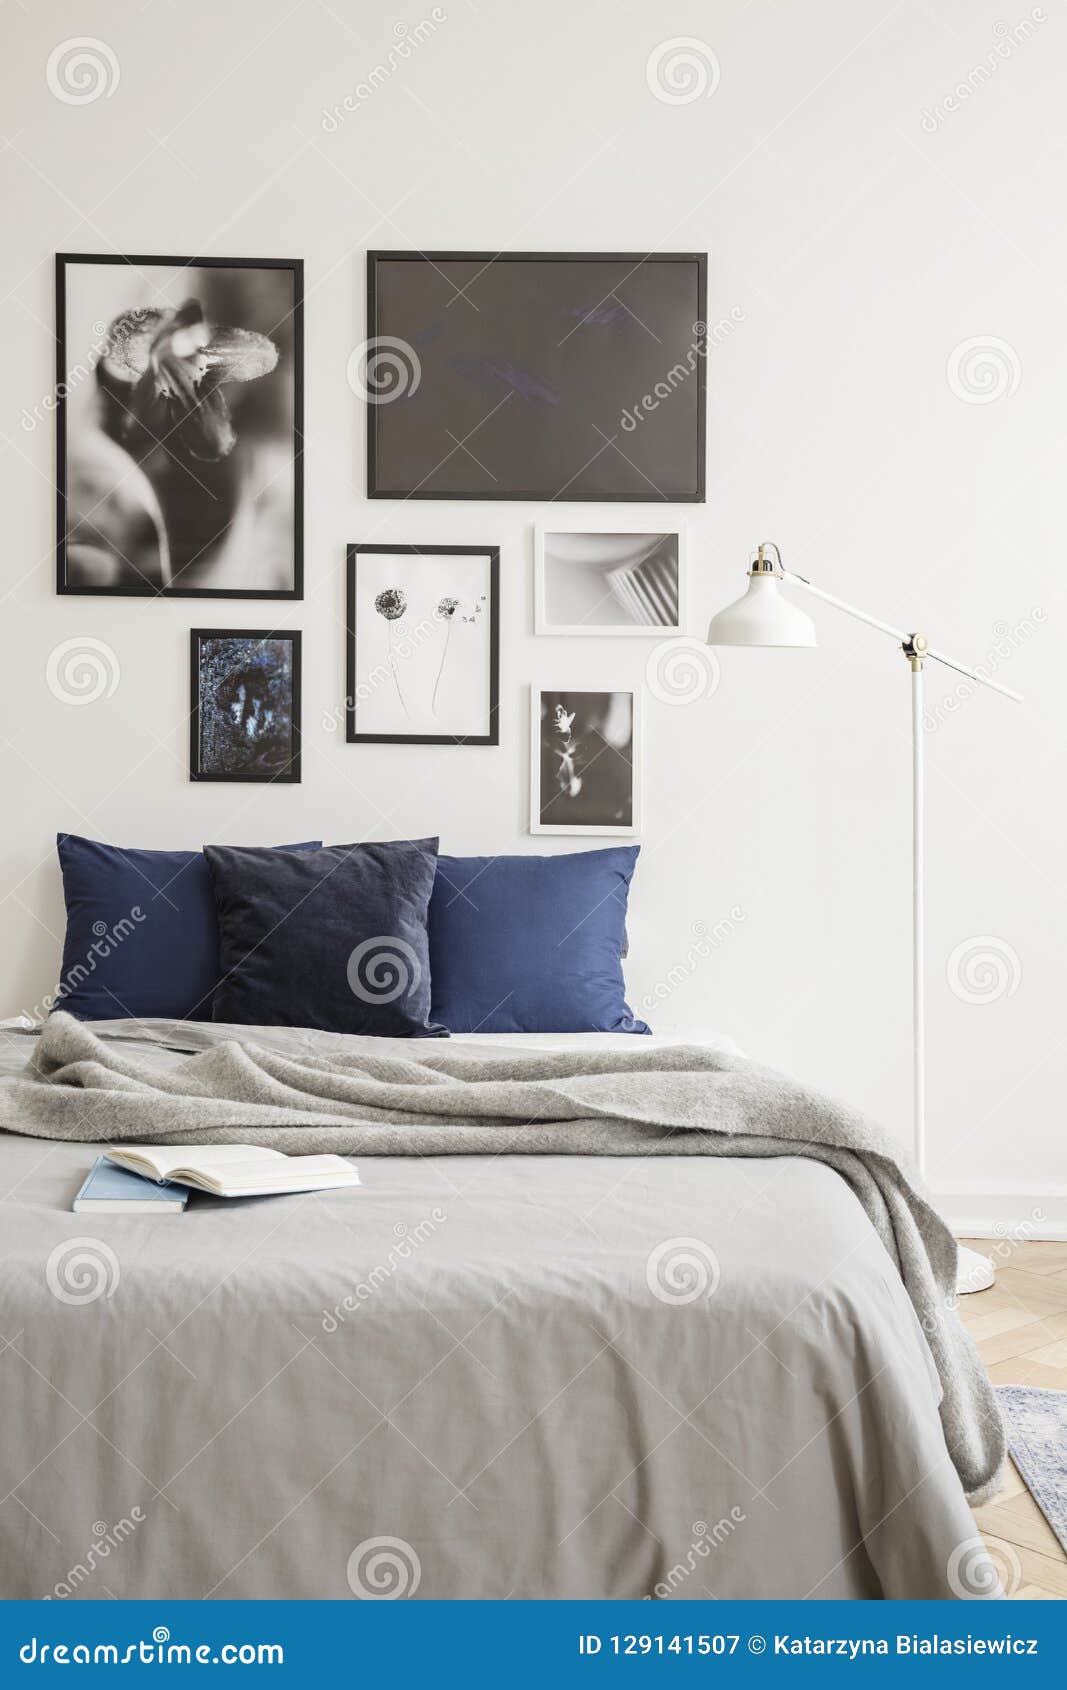 White Industrial Style Floor Lamp By A Cozy Bed With Dark Blue